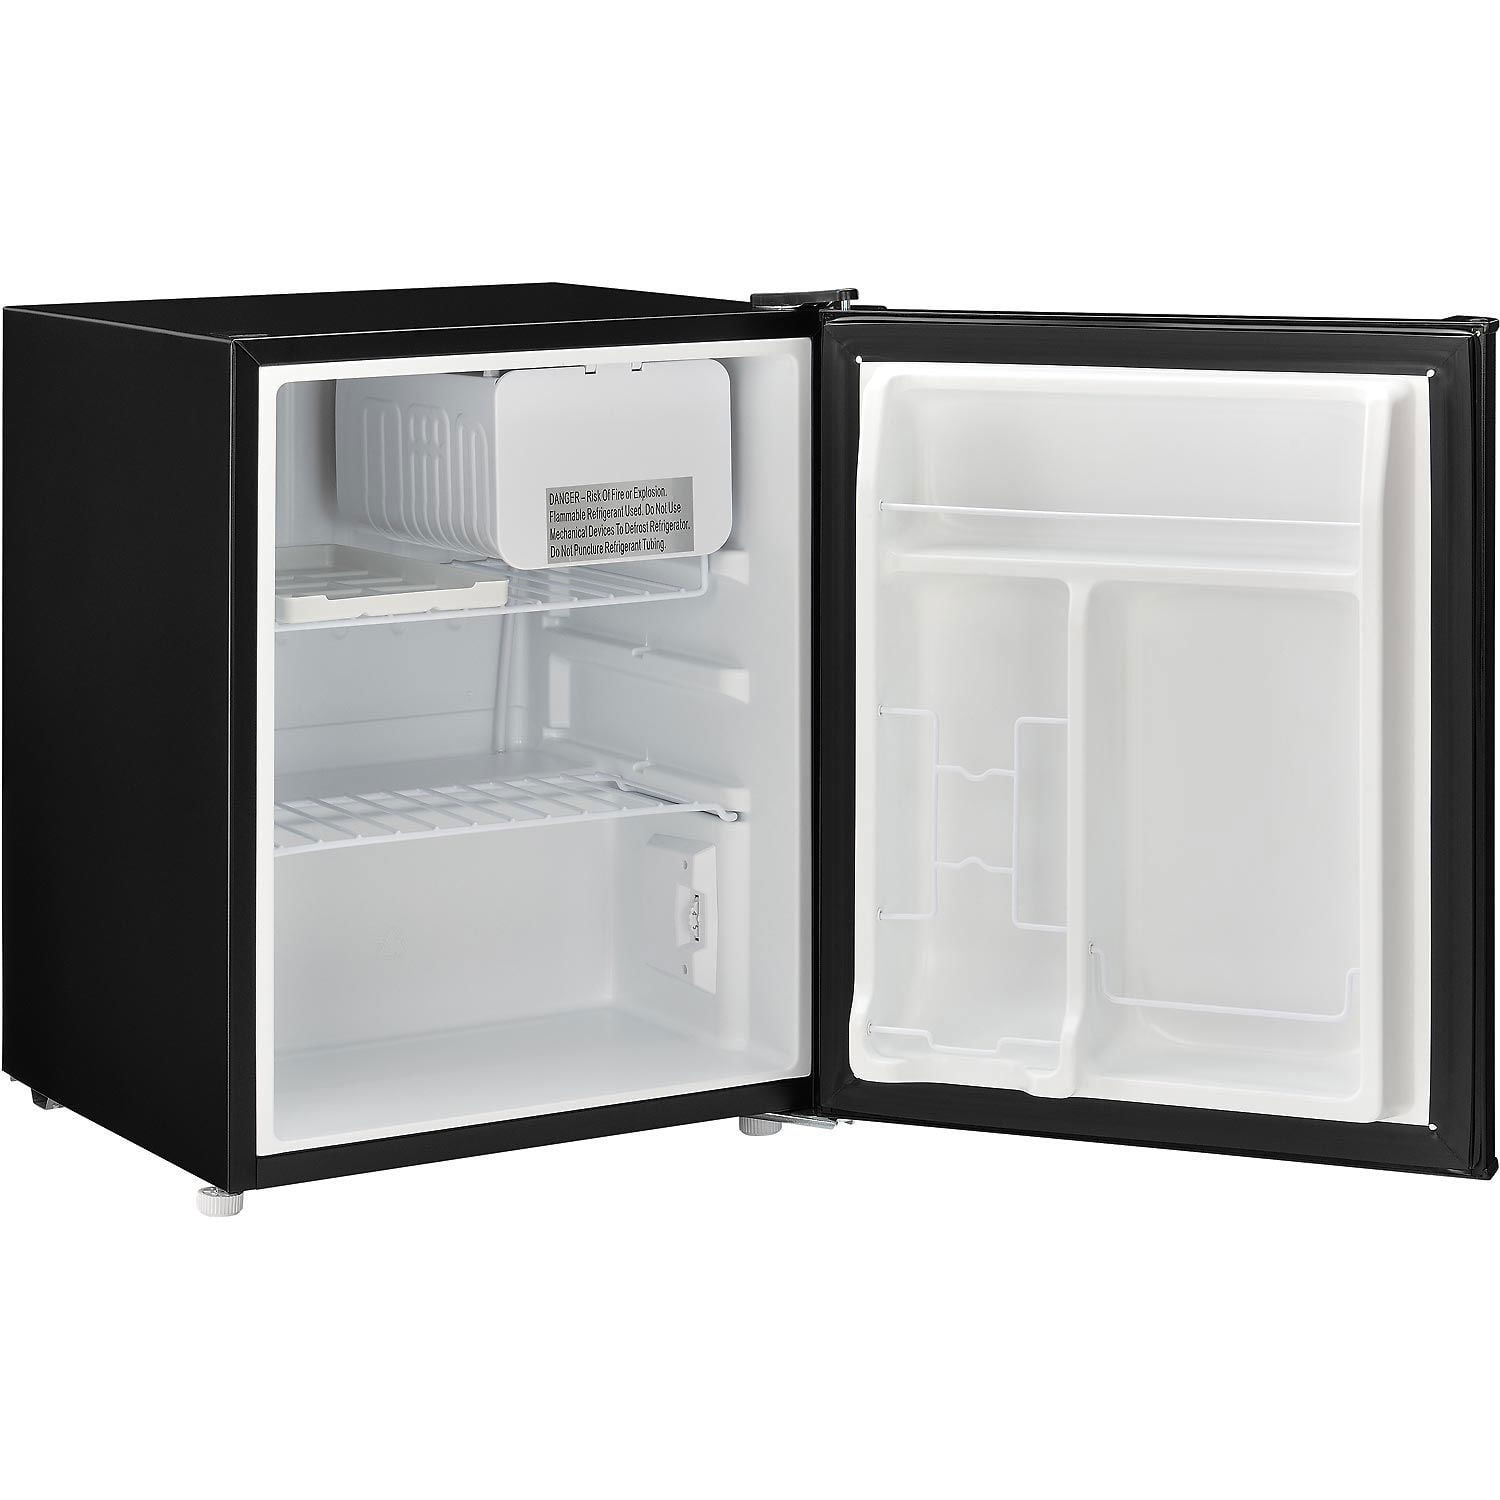 Brand New Compact Mini Fridge With Freezer (black) for Sale in West Hills,  CA - OfferUp